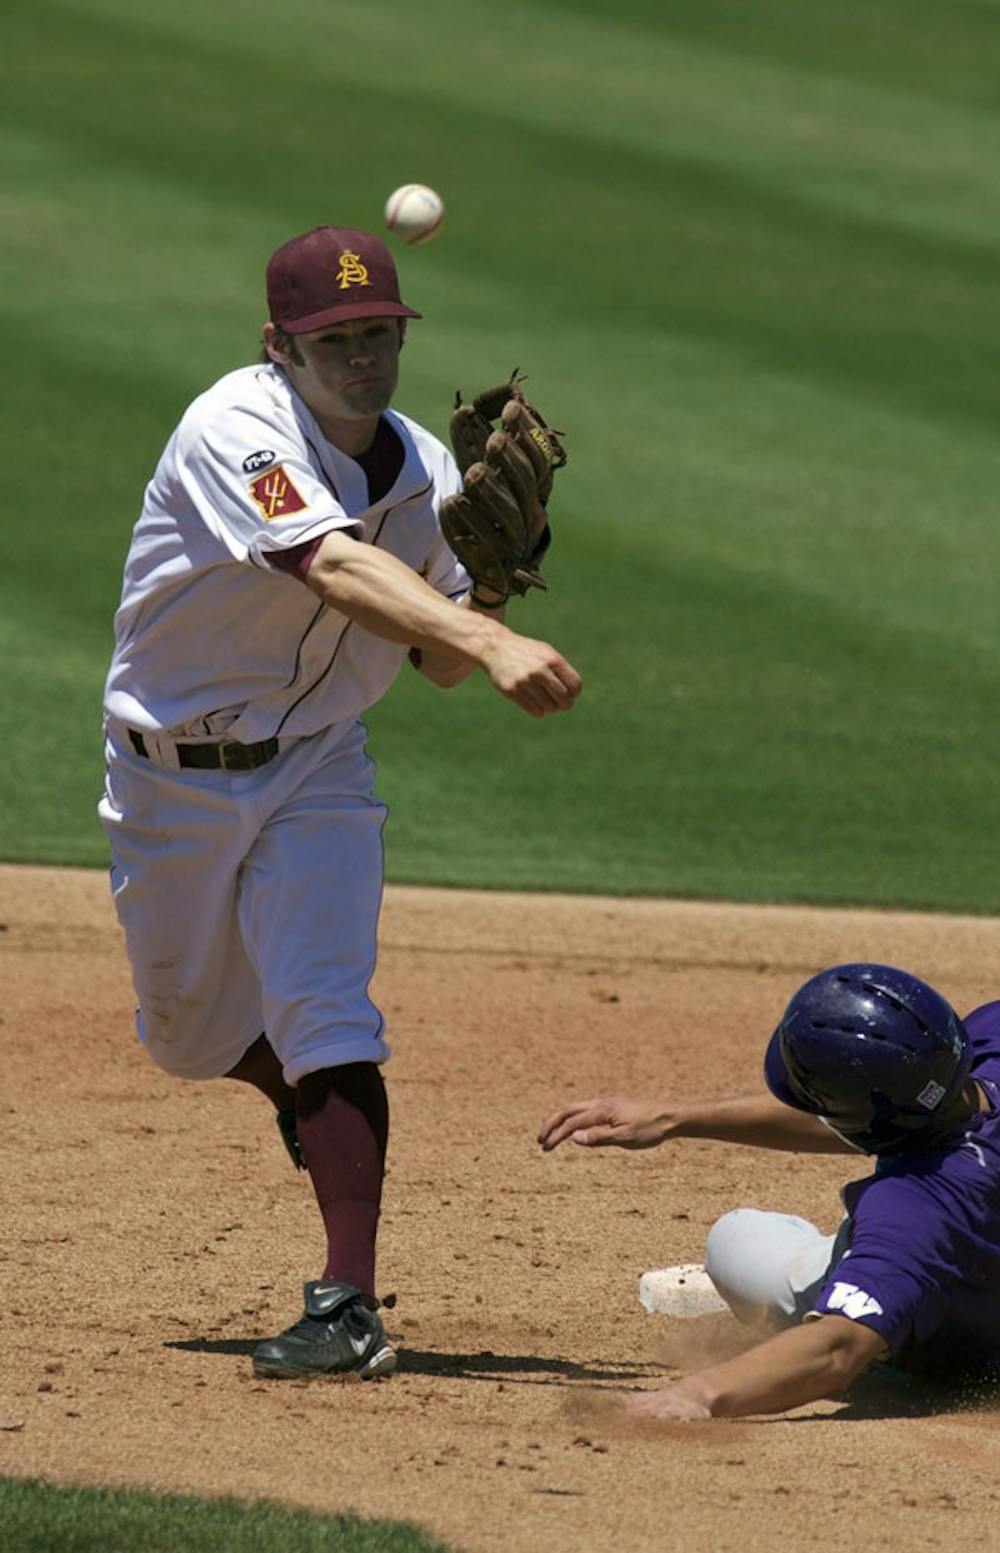 DOUBLE THE FUN: Sophomore second baseman Zack MacPhee turns a double play in the Sun Devils’ 10-4 win over Washington on Sunday at Packard Stadium. ASU won two of three games on the weekend to stay in first place in the Pac-10. (Photo By Scott Stuk)